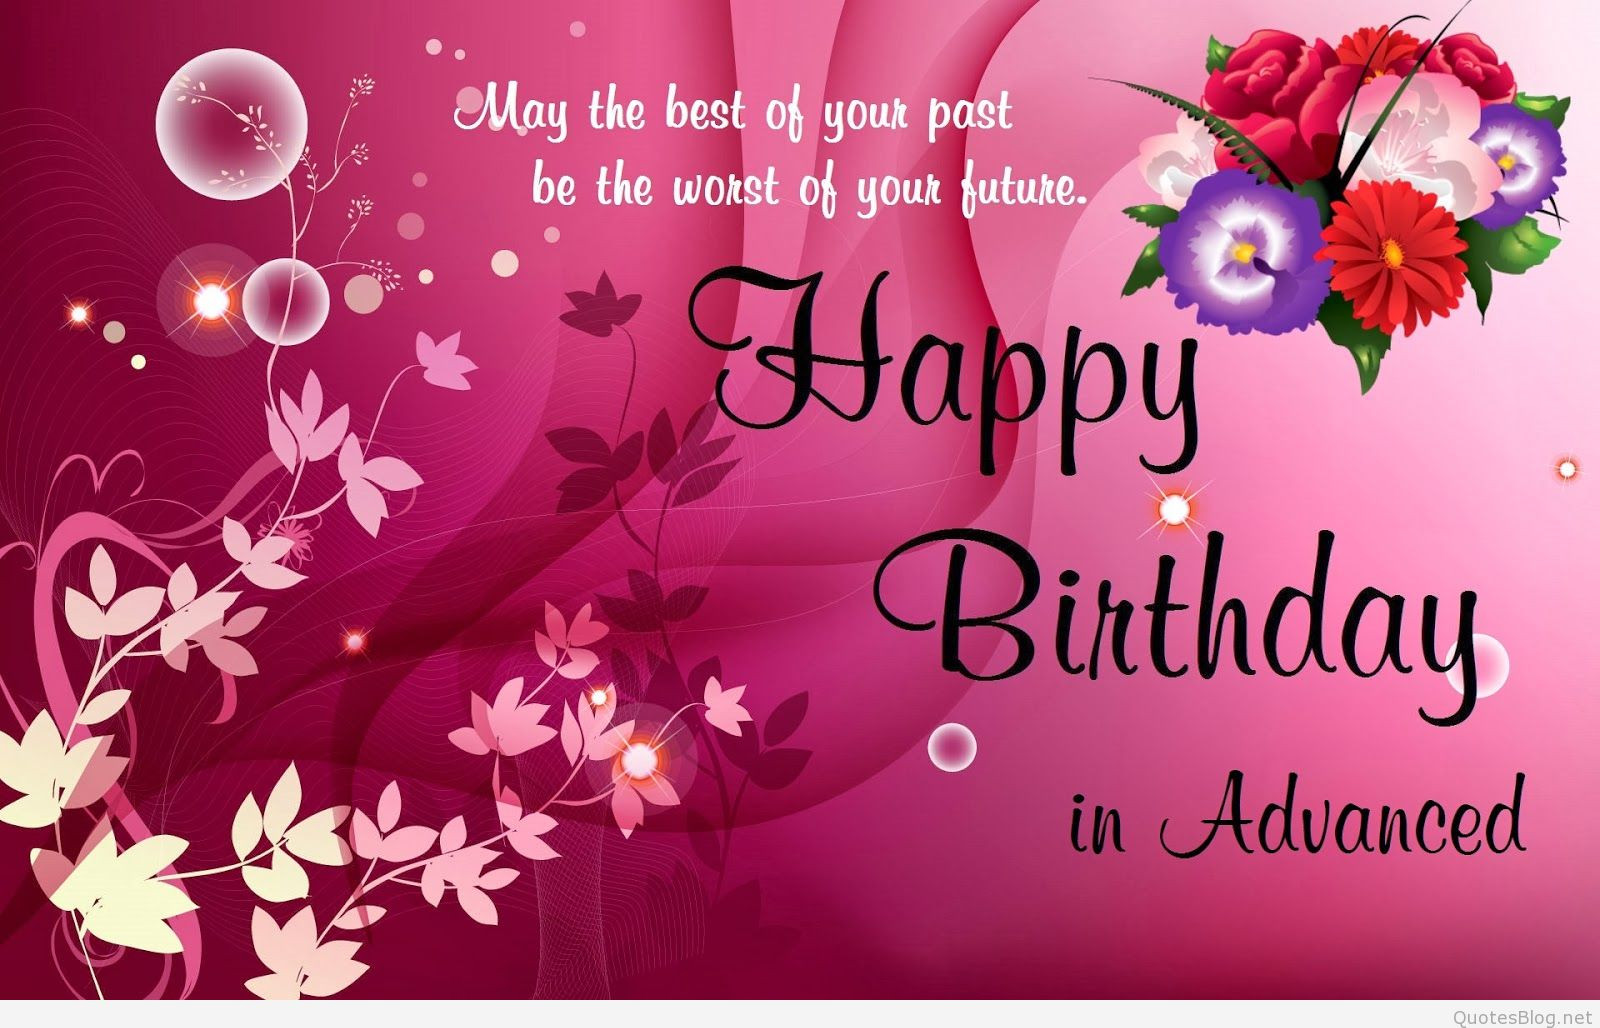 Happy Birthday Blessing Quotes
 Top 20 happy birthday quotes and messages